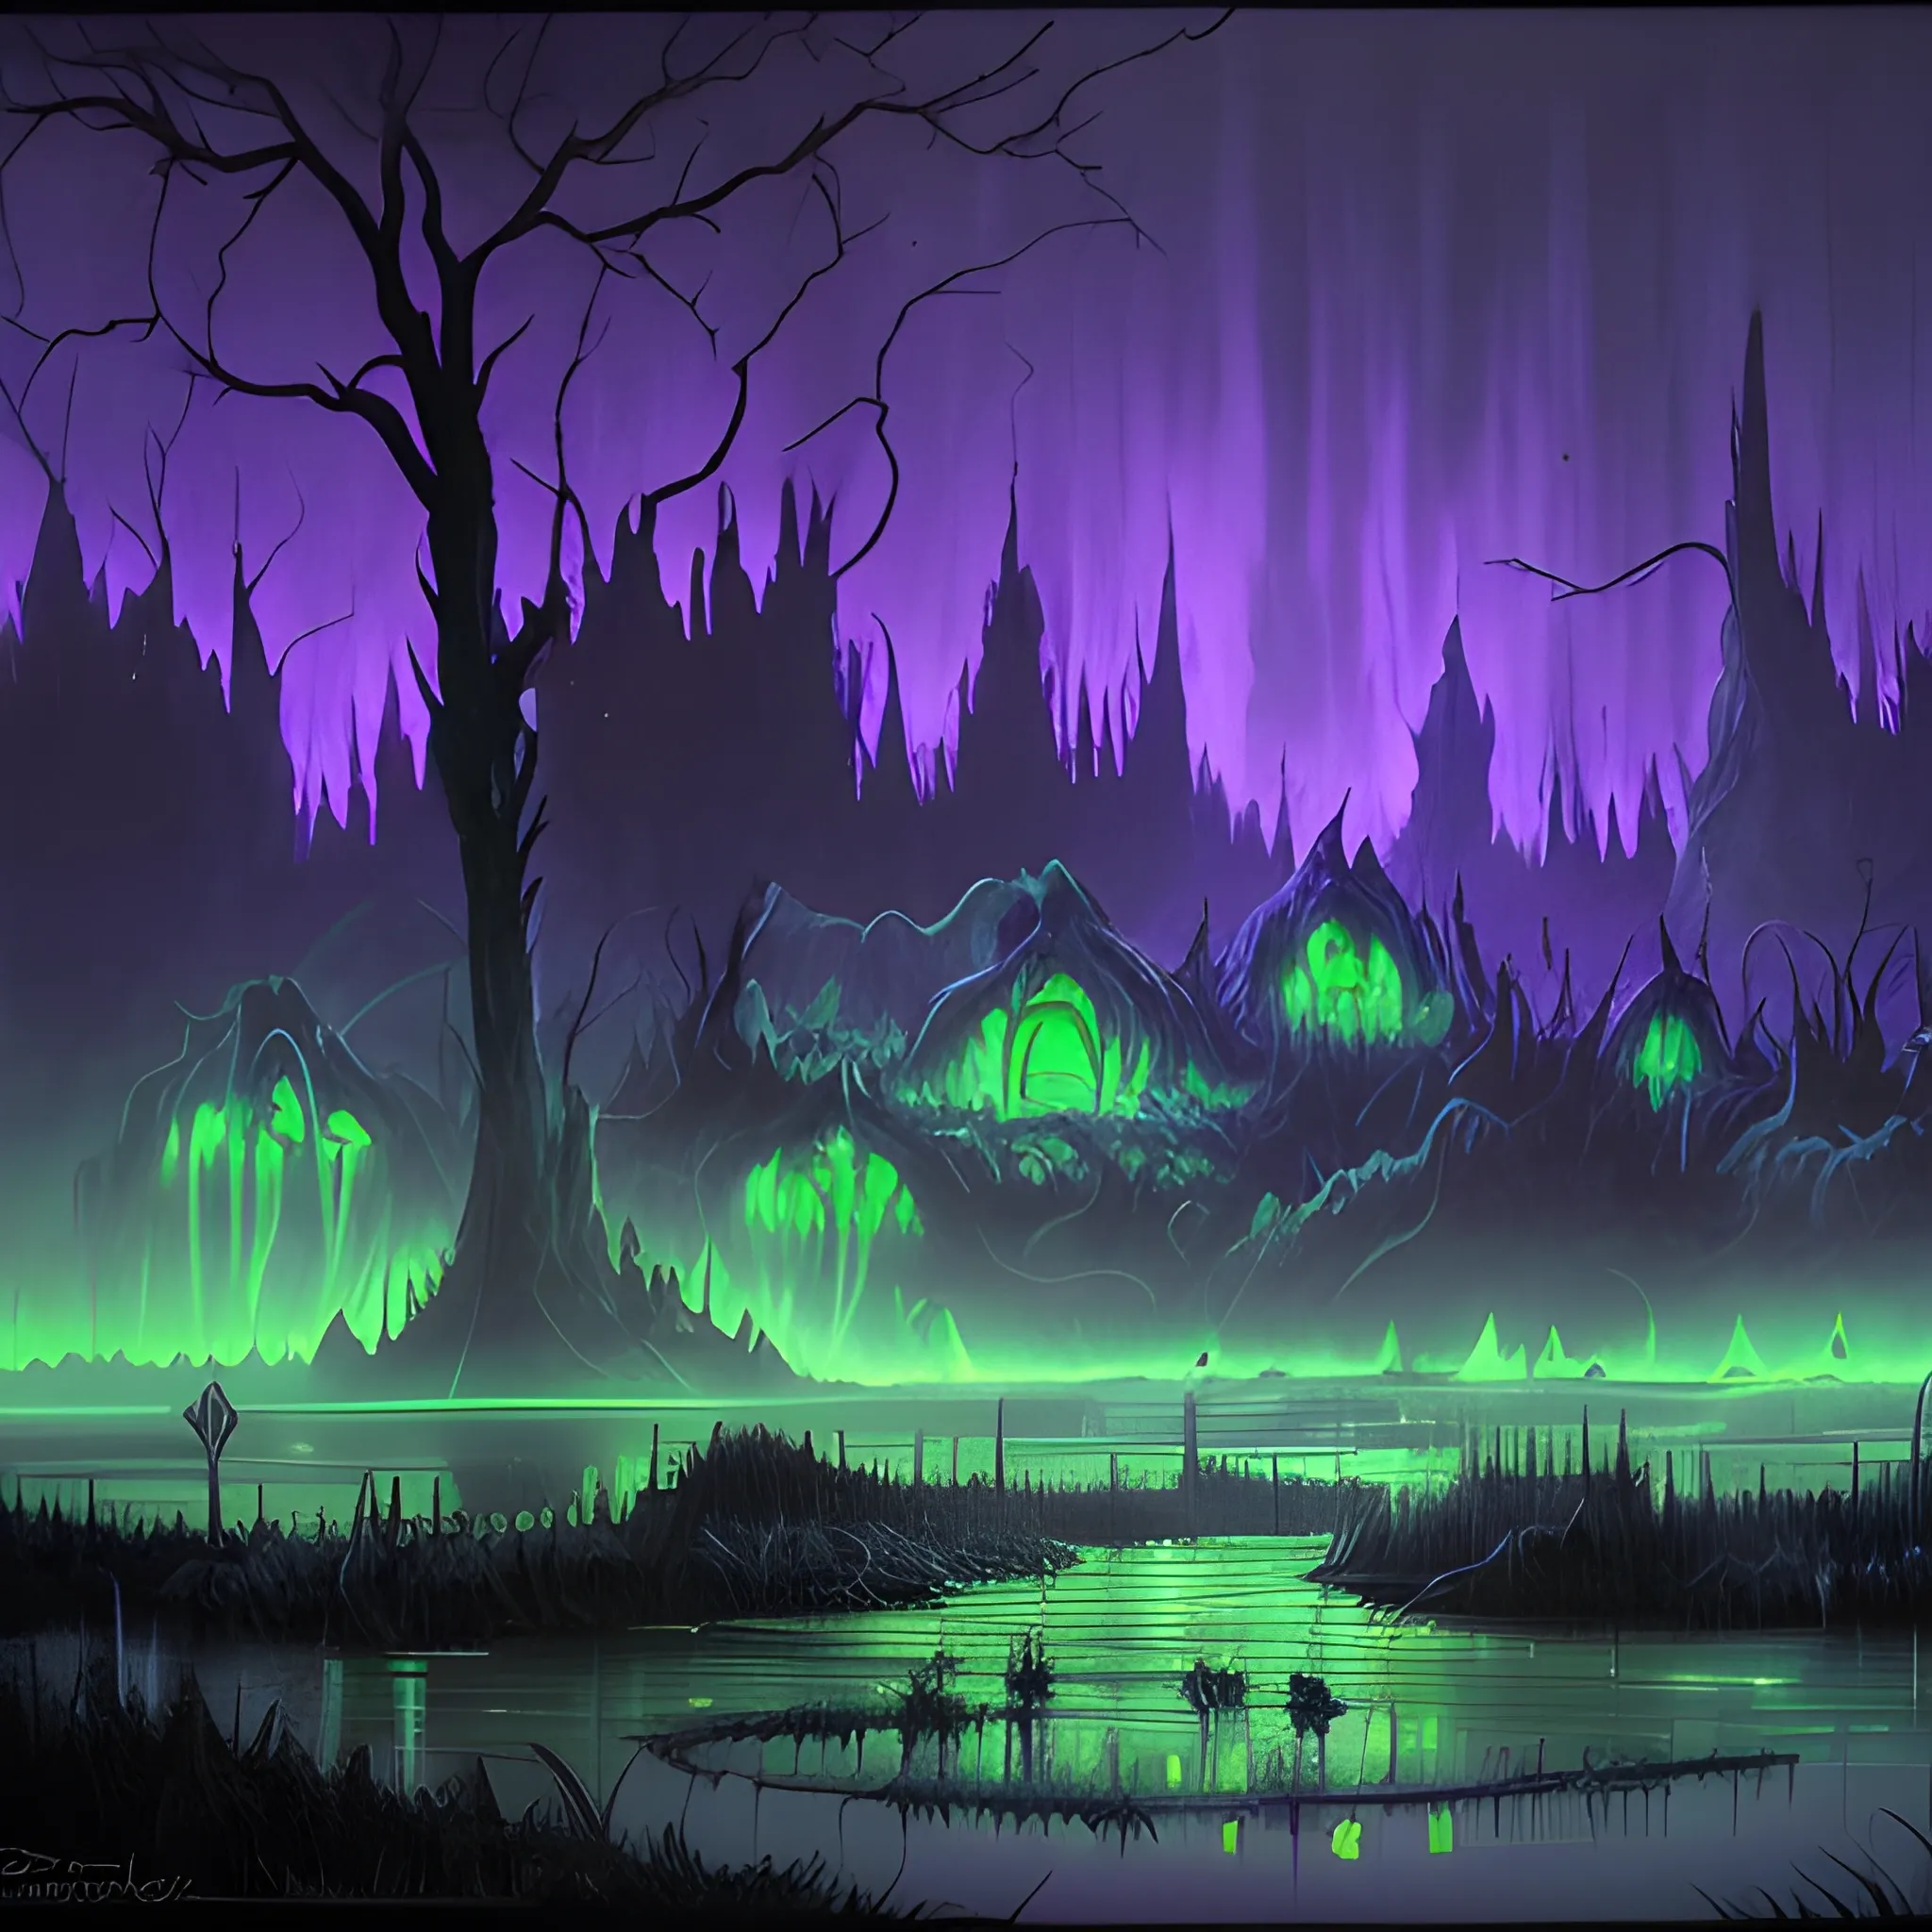 concept art painting of a fantasy dark swamp landscape at night, with glowing green lights, glowing blue ghost, dark purple sky, realistic, detailed, cel shaded, in the style of salvador dali

